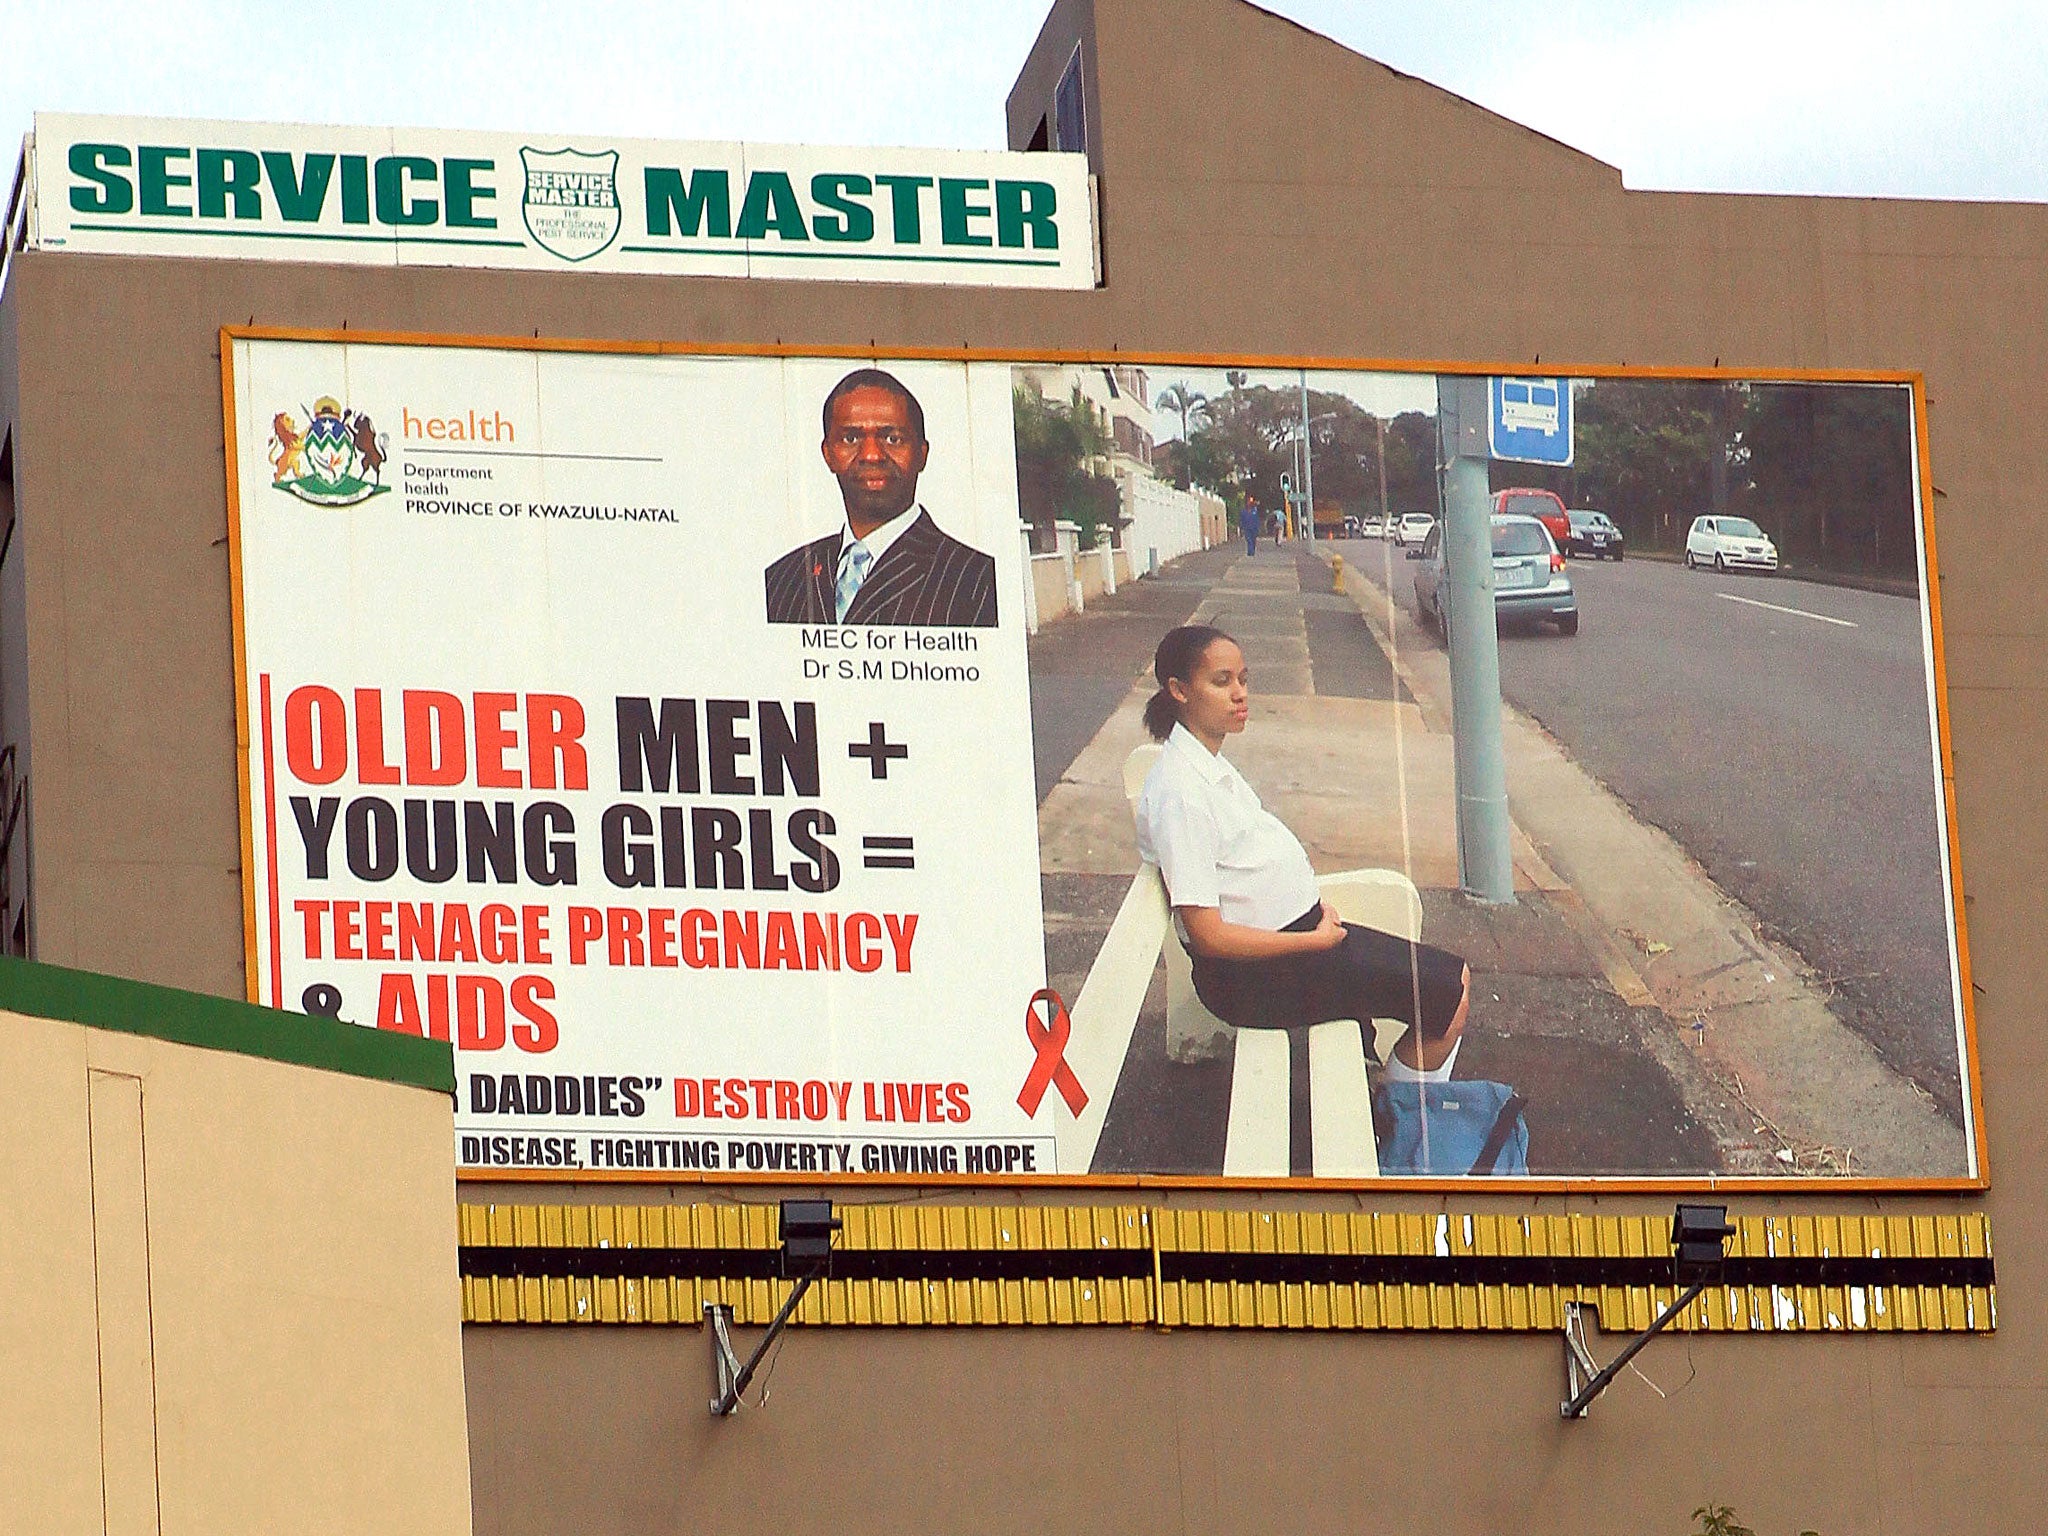 A giant billboard in South Africa  highlighting the dangers of young women having sex with older men